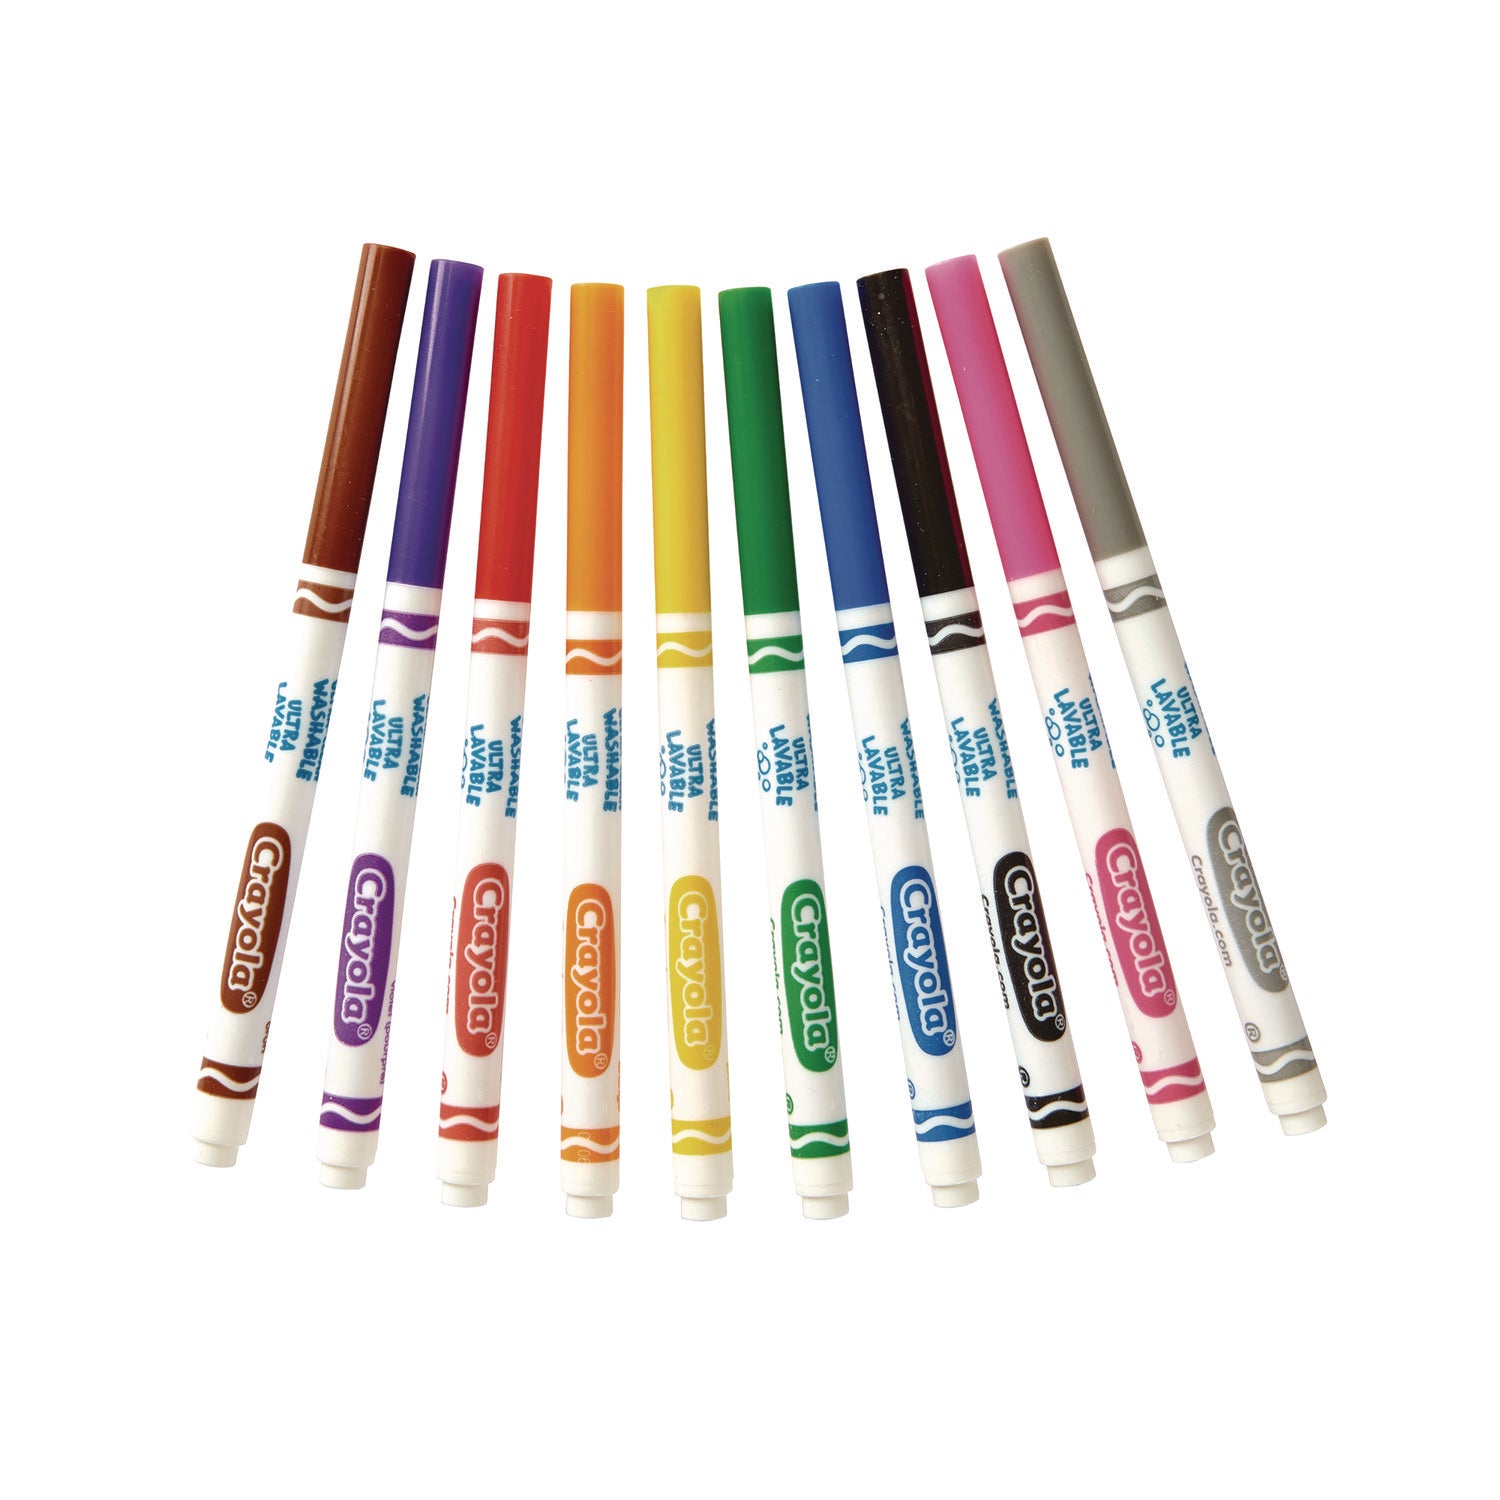 Ultra-Clean Washable Markers, Fine Bullet Tip, Assorted Colors, Dozen - 